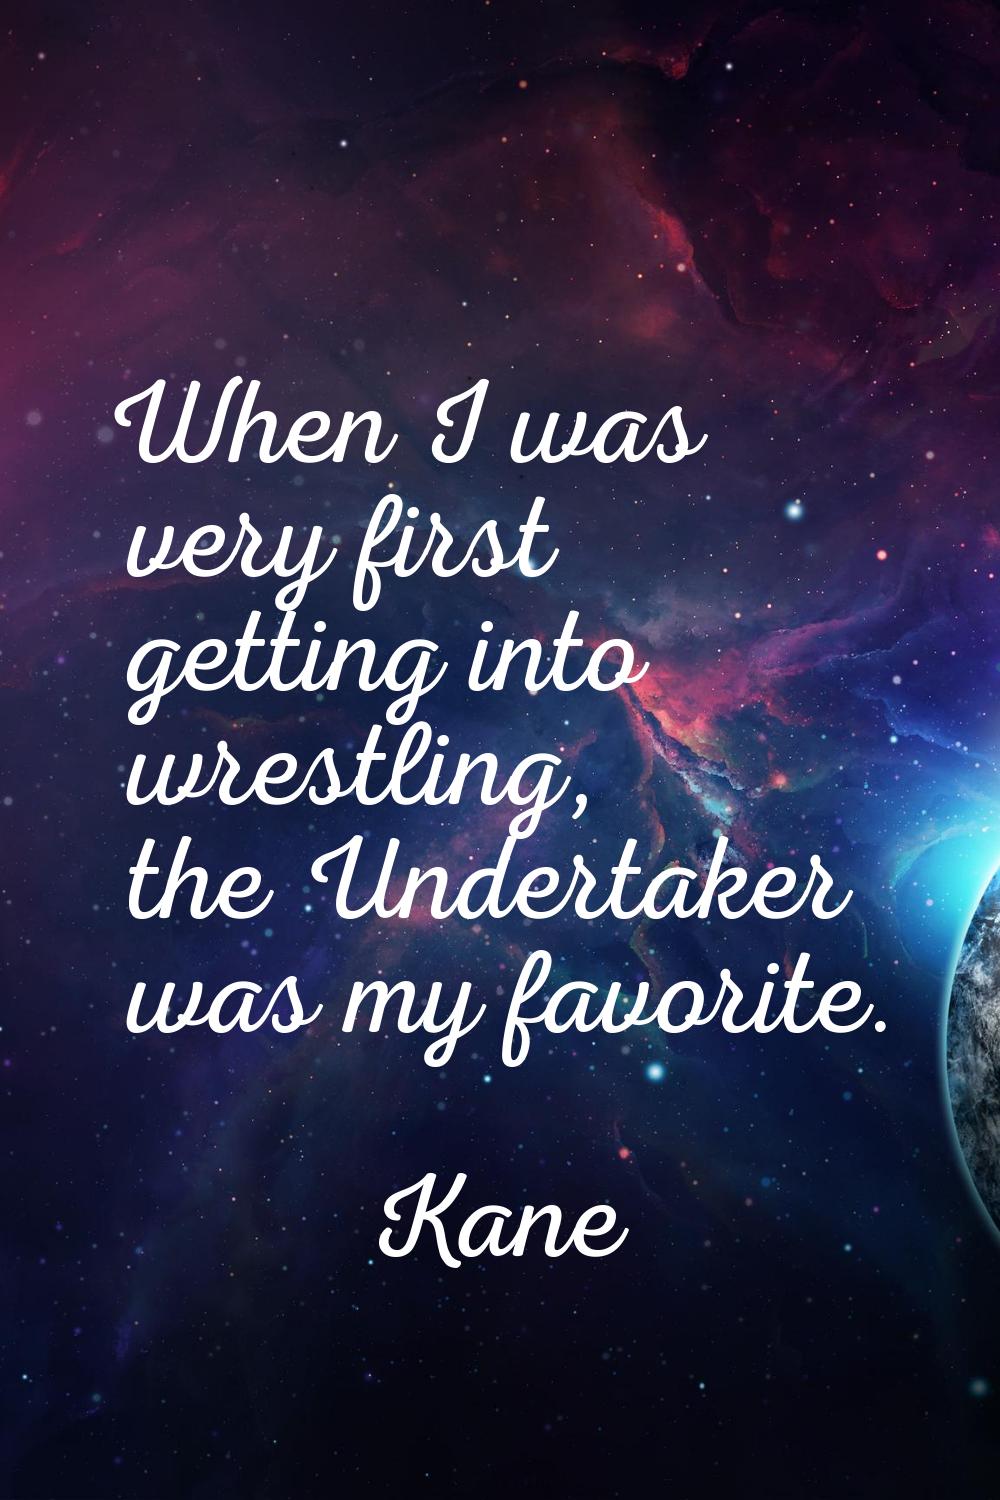 When I was very first getting into wrestling, the Undertaker was my favorite.